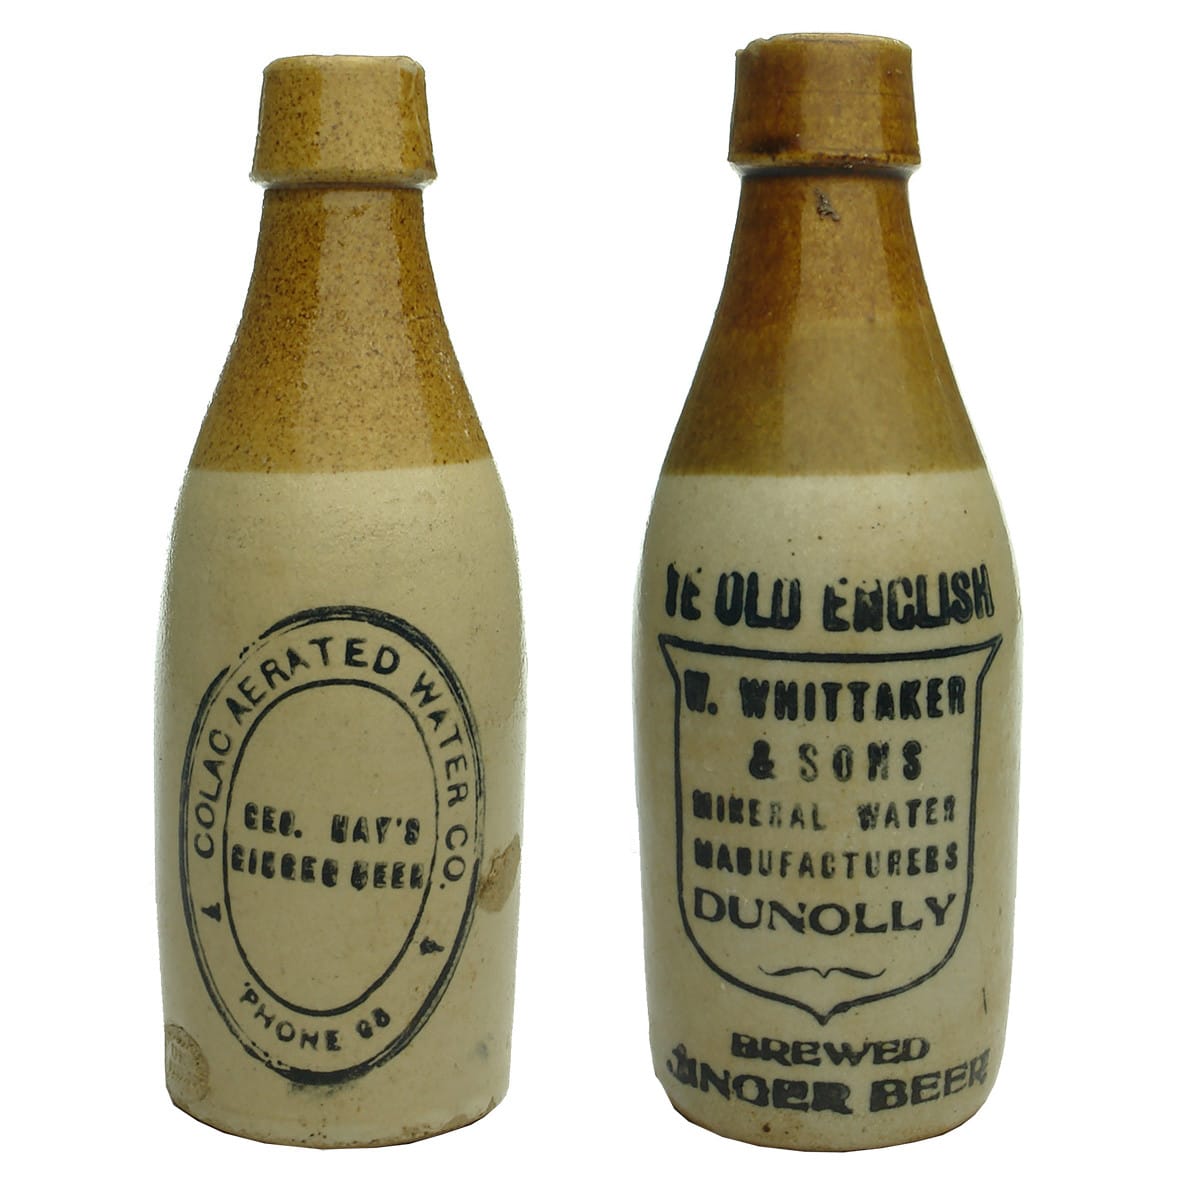 2 Ginger Beers: Hay's Colac Aerated Water Co; W. Whittaker & Sons, Dunolly. (Victoria)